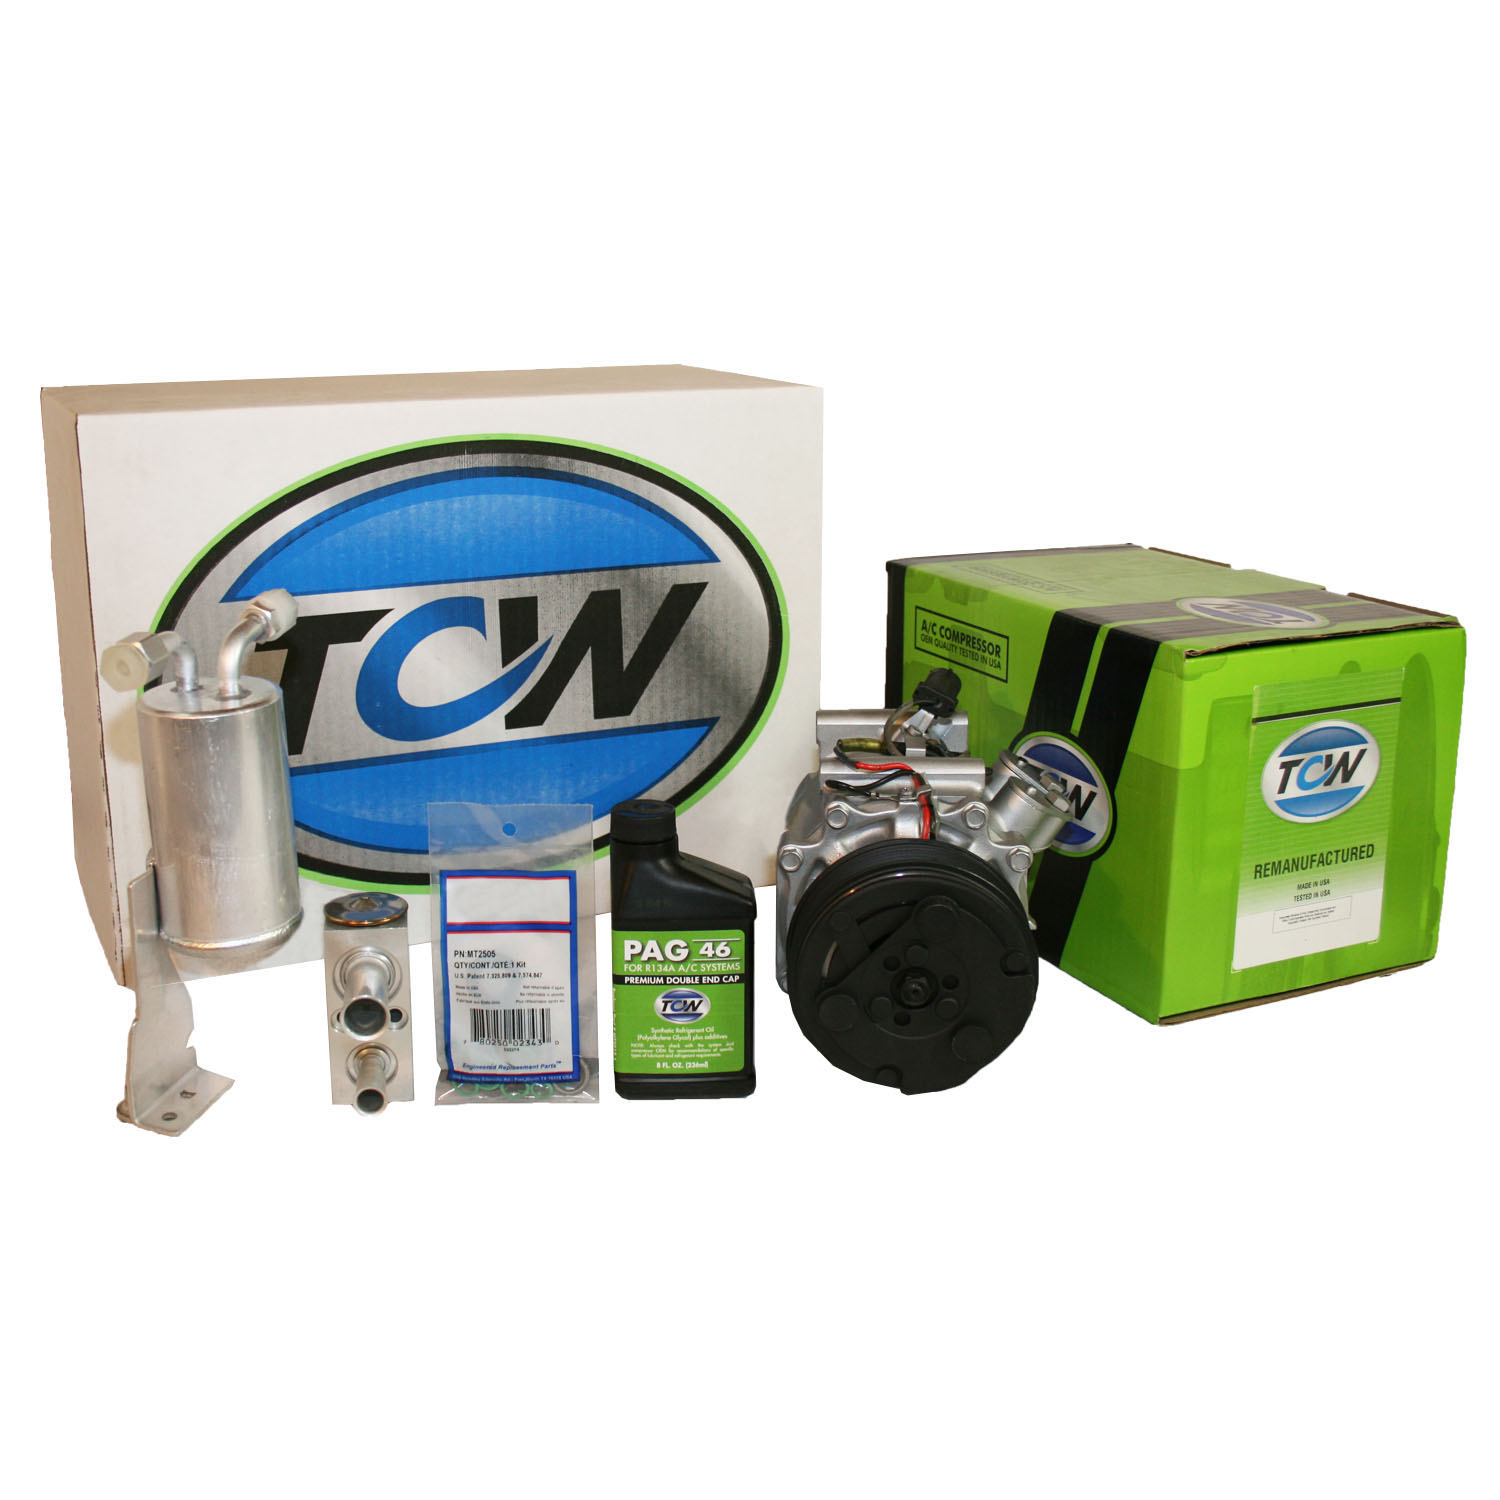 TCW Vehicle A/C Kit K1000464R Remanufactured Product Image field_60b6a13a6e67c